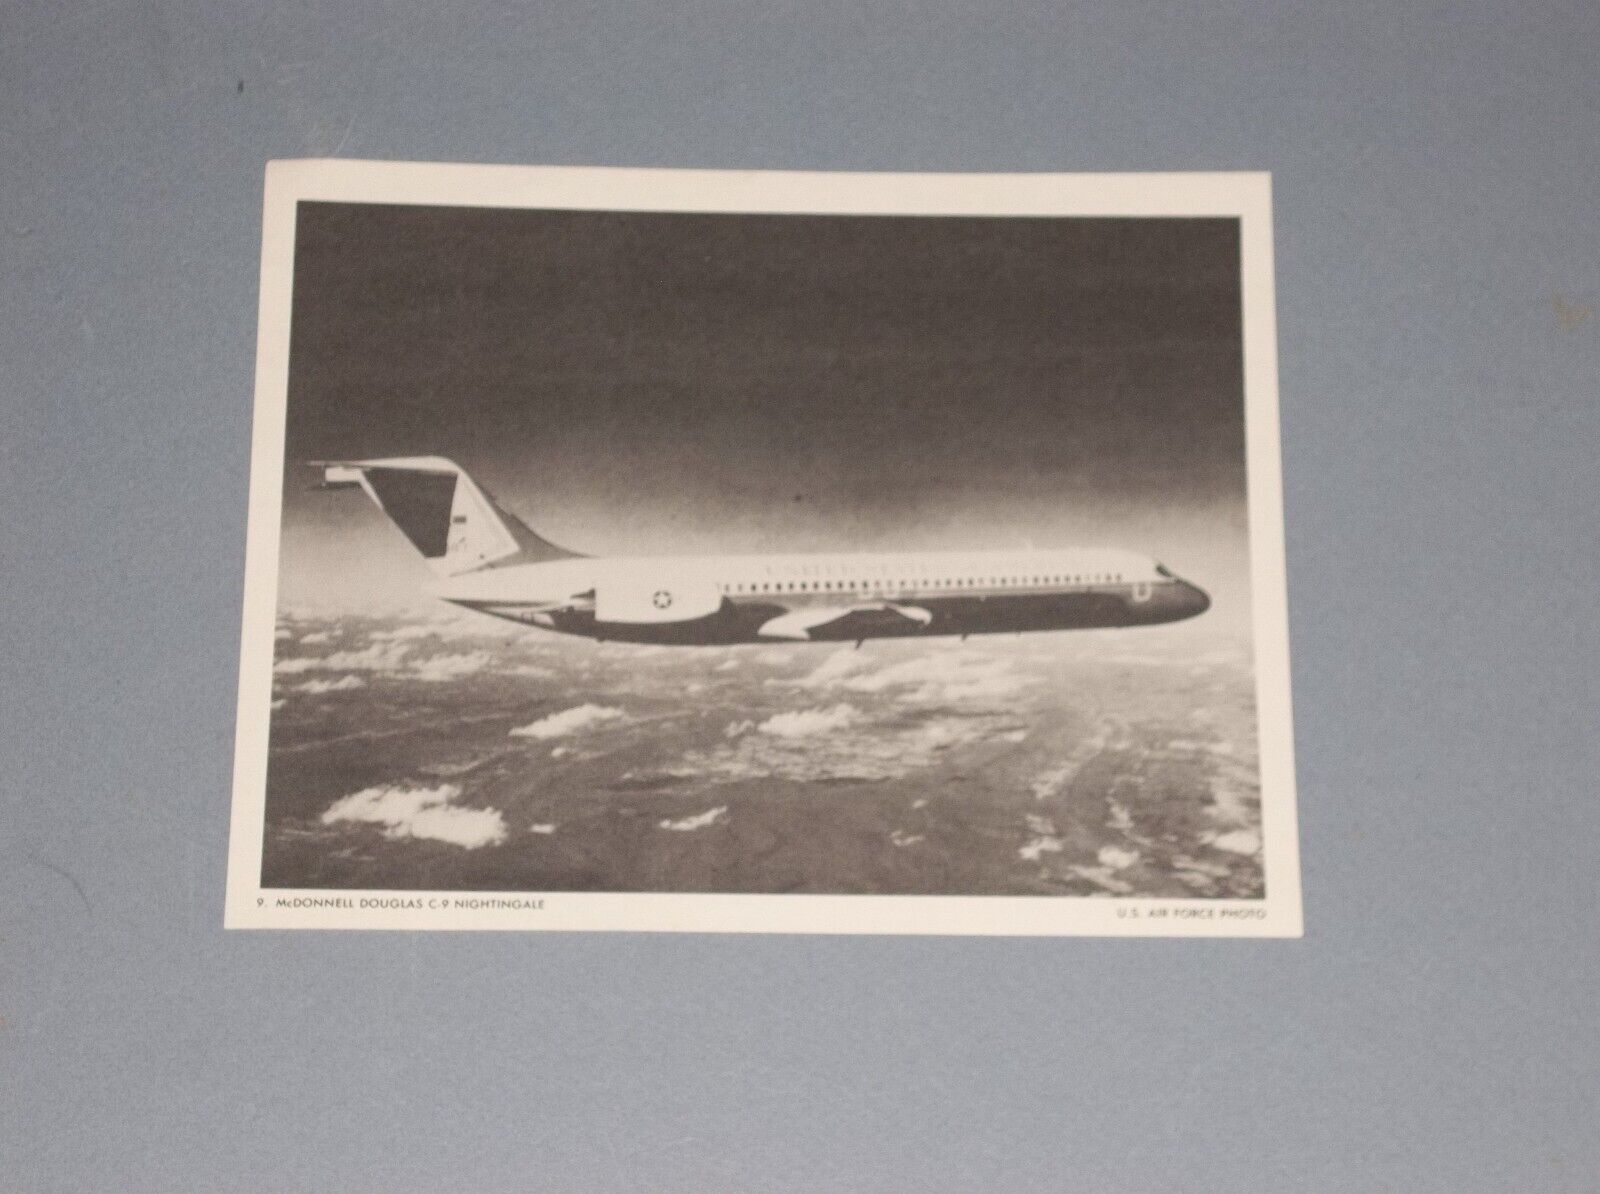 1977 USAF PHOTO OF A MCDONNELL-DOUGLAS C-9 NIGHTENGALE